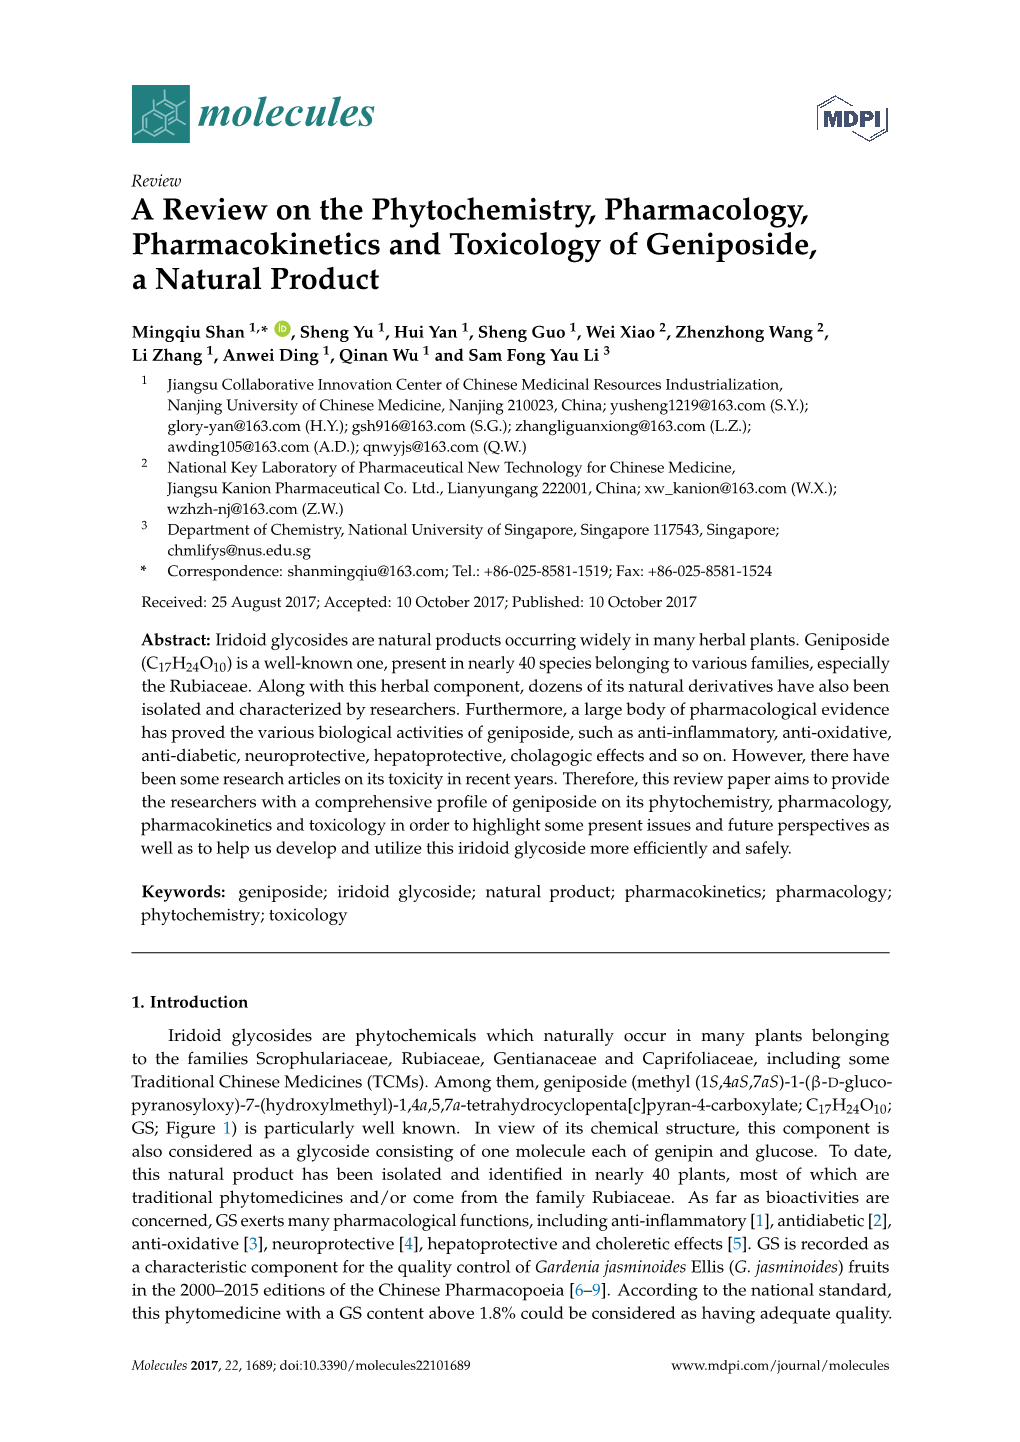 A Review on the Phytochemistry, Pharmacology, Pharmacokinetics and Toxicology of Geniposide, a Natural Product